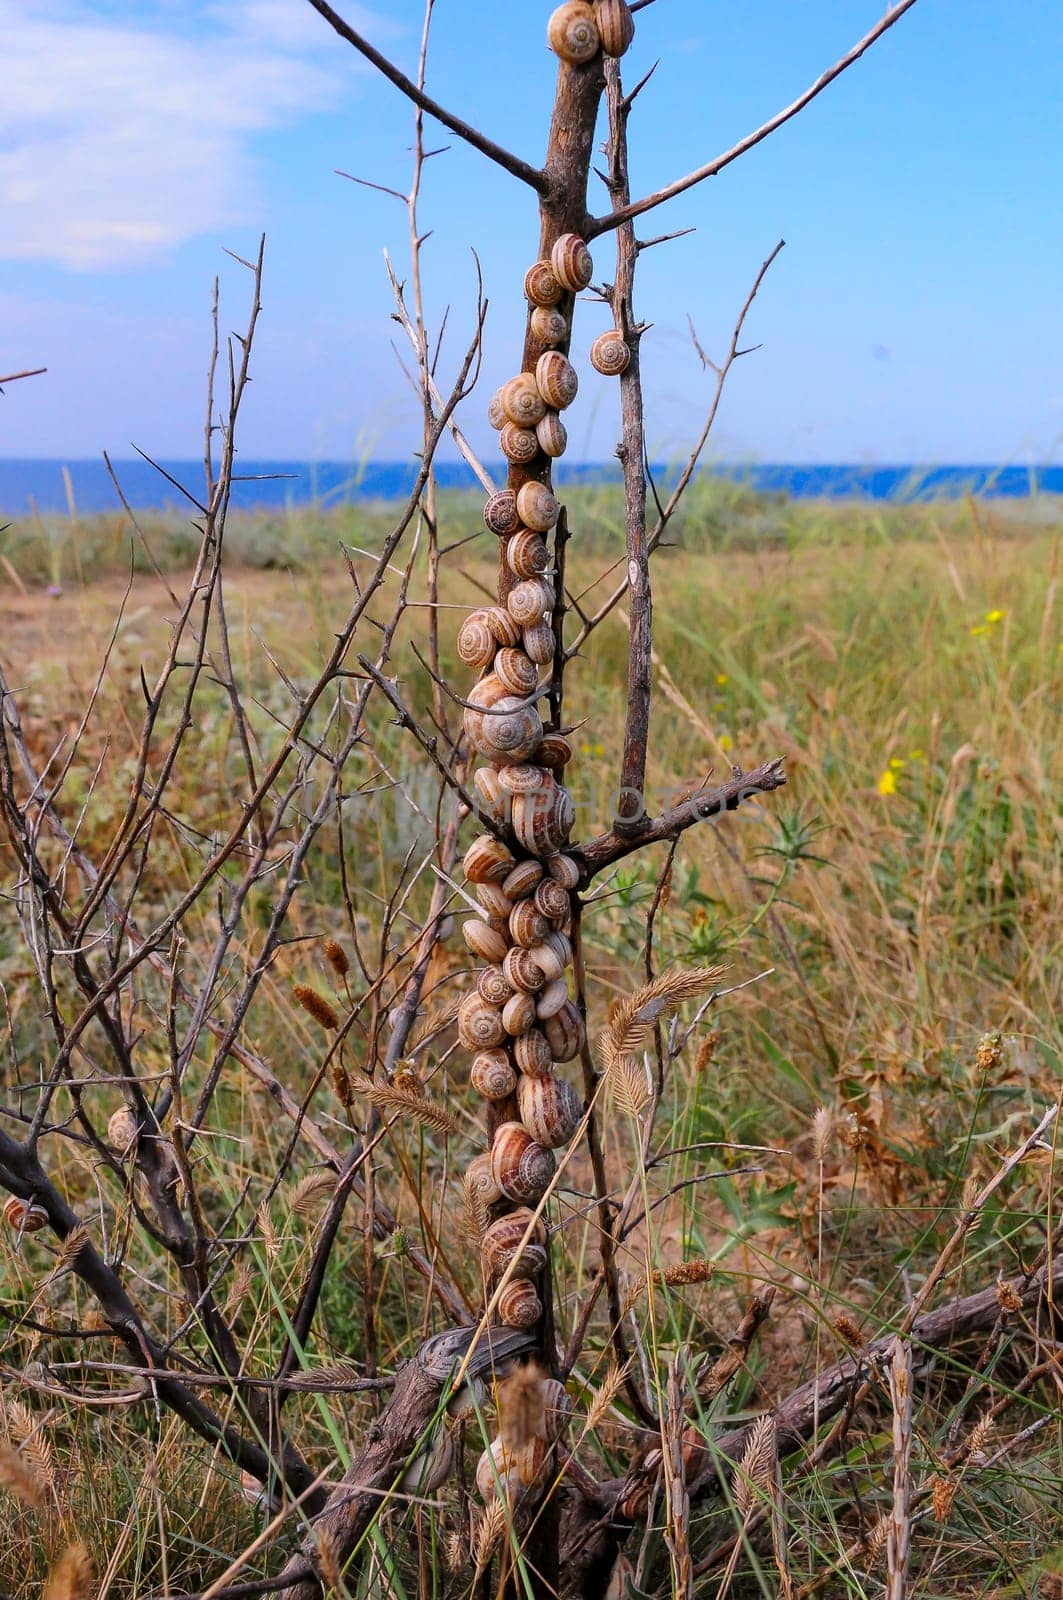 Eobania vermiculata (Helicidae),  accumulation of sleeping mollusks on the branches of plants in summer in the eastern Crimea by Hydrobiolog